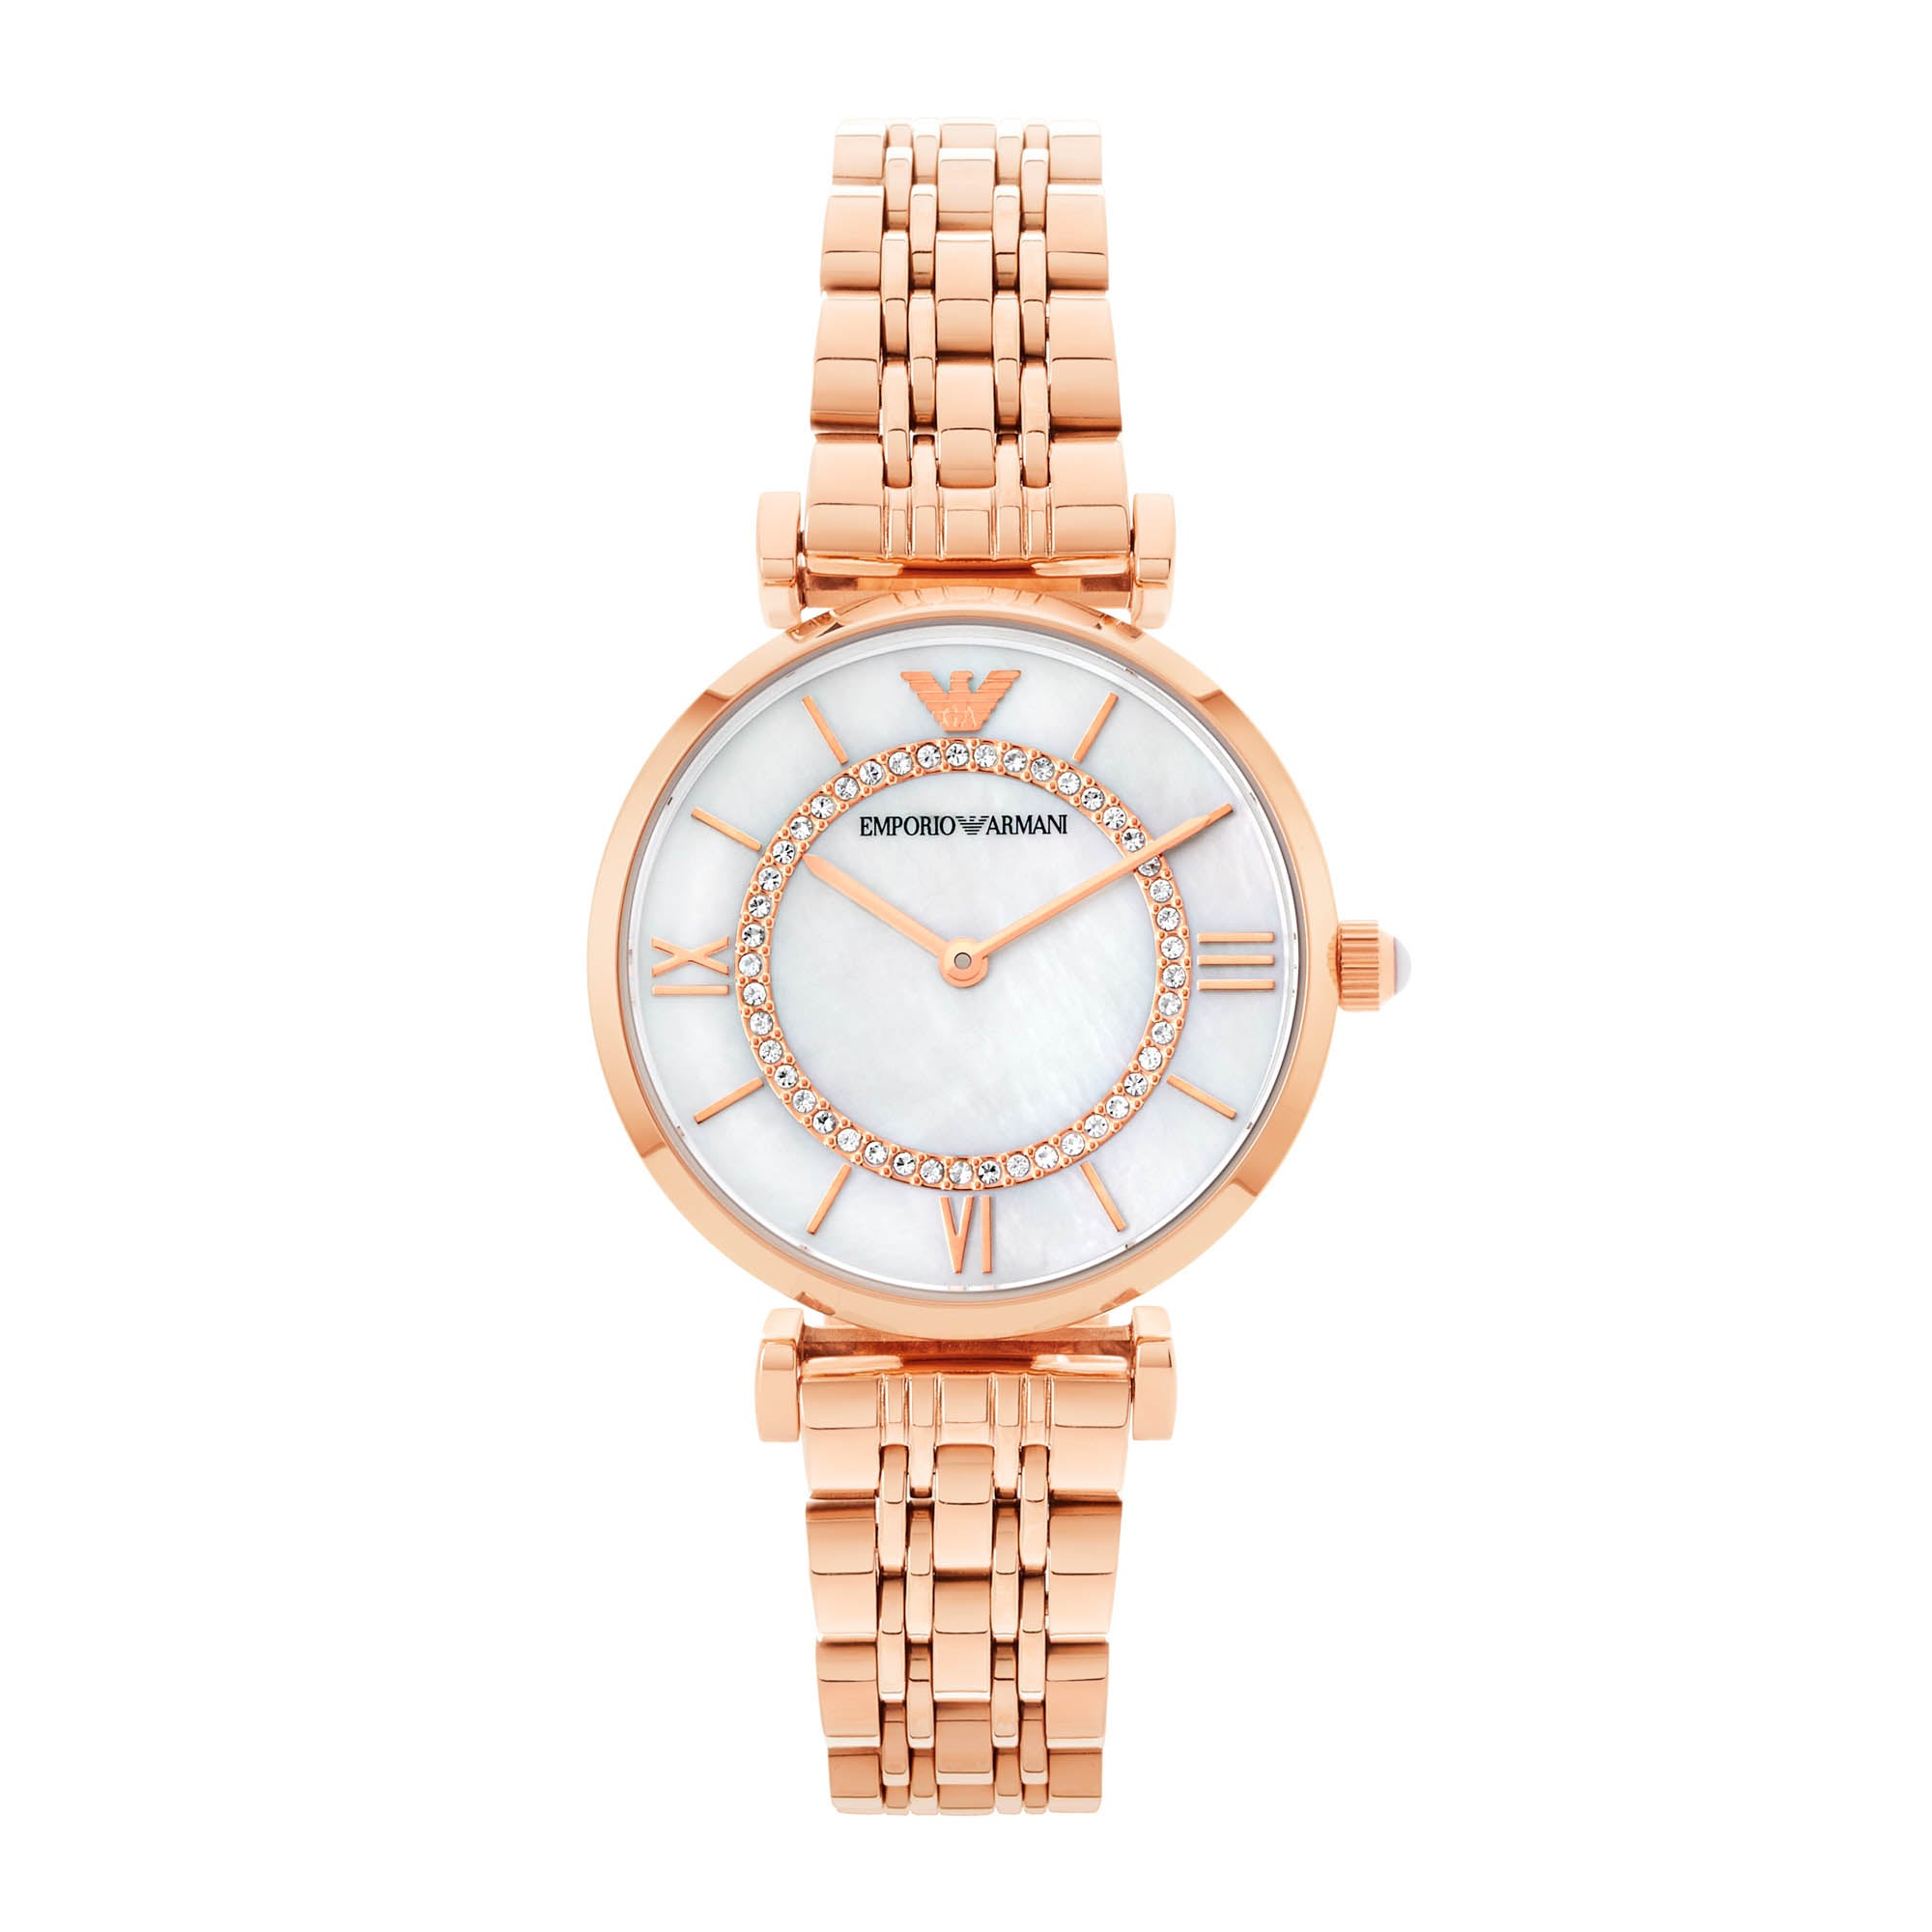 Emporio Armani Gianni T-Bar Watch Rose Gold AR1909 - Front